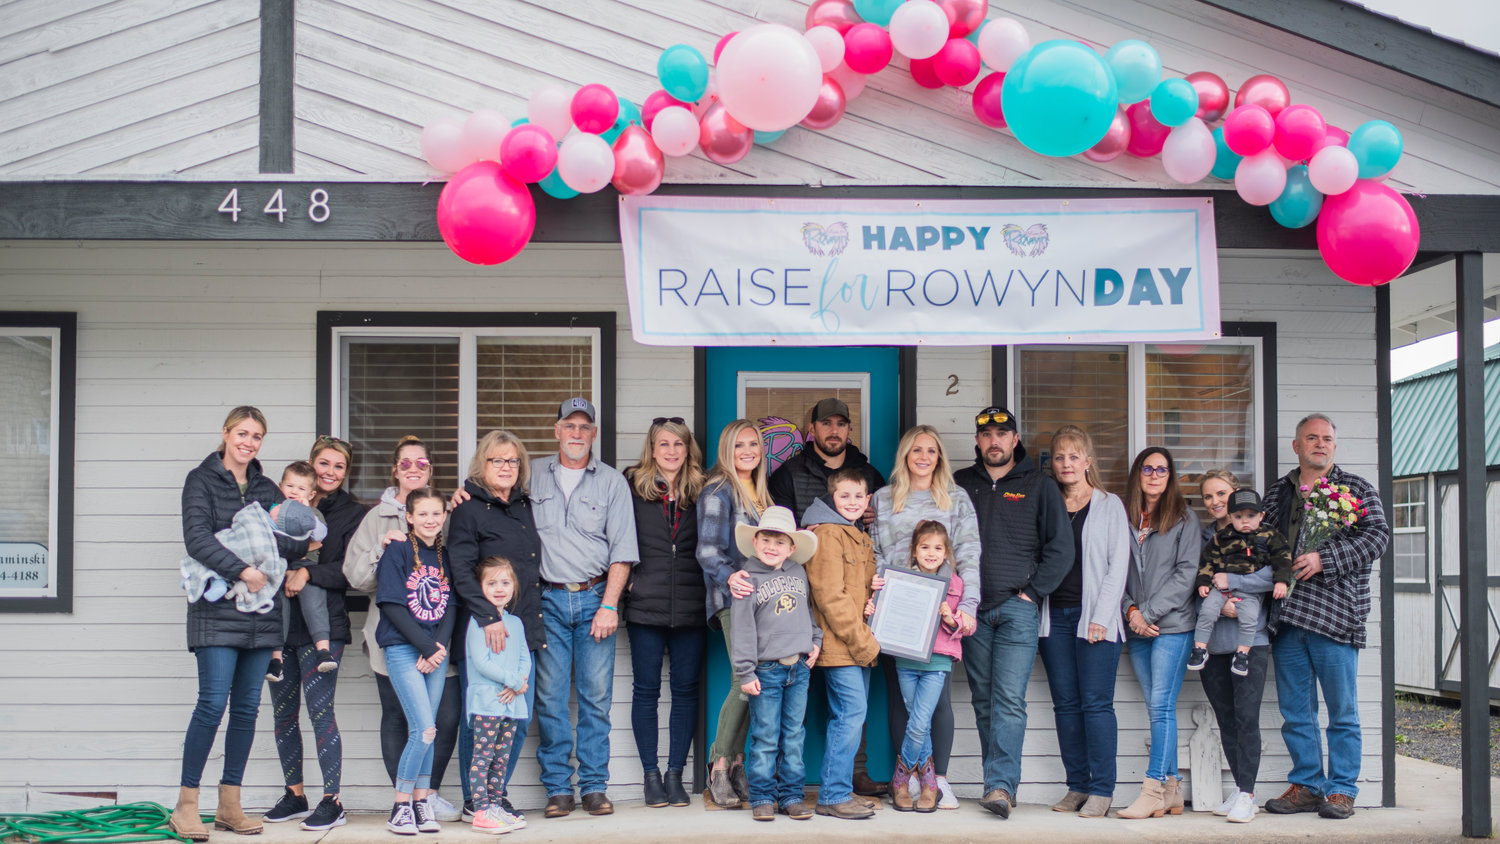 Family members pose for a photo Tuesday morning during an event to honor Raise for Rowyn Day in Tenino.